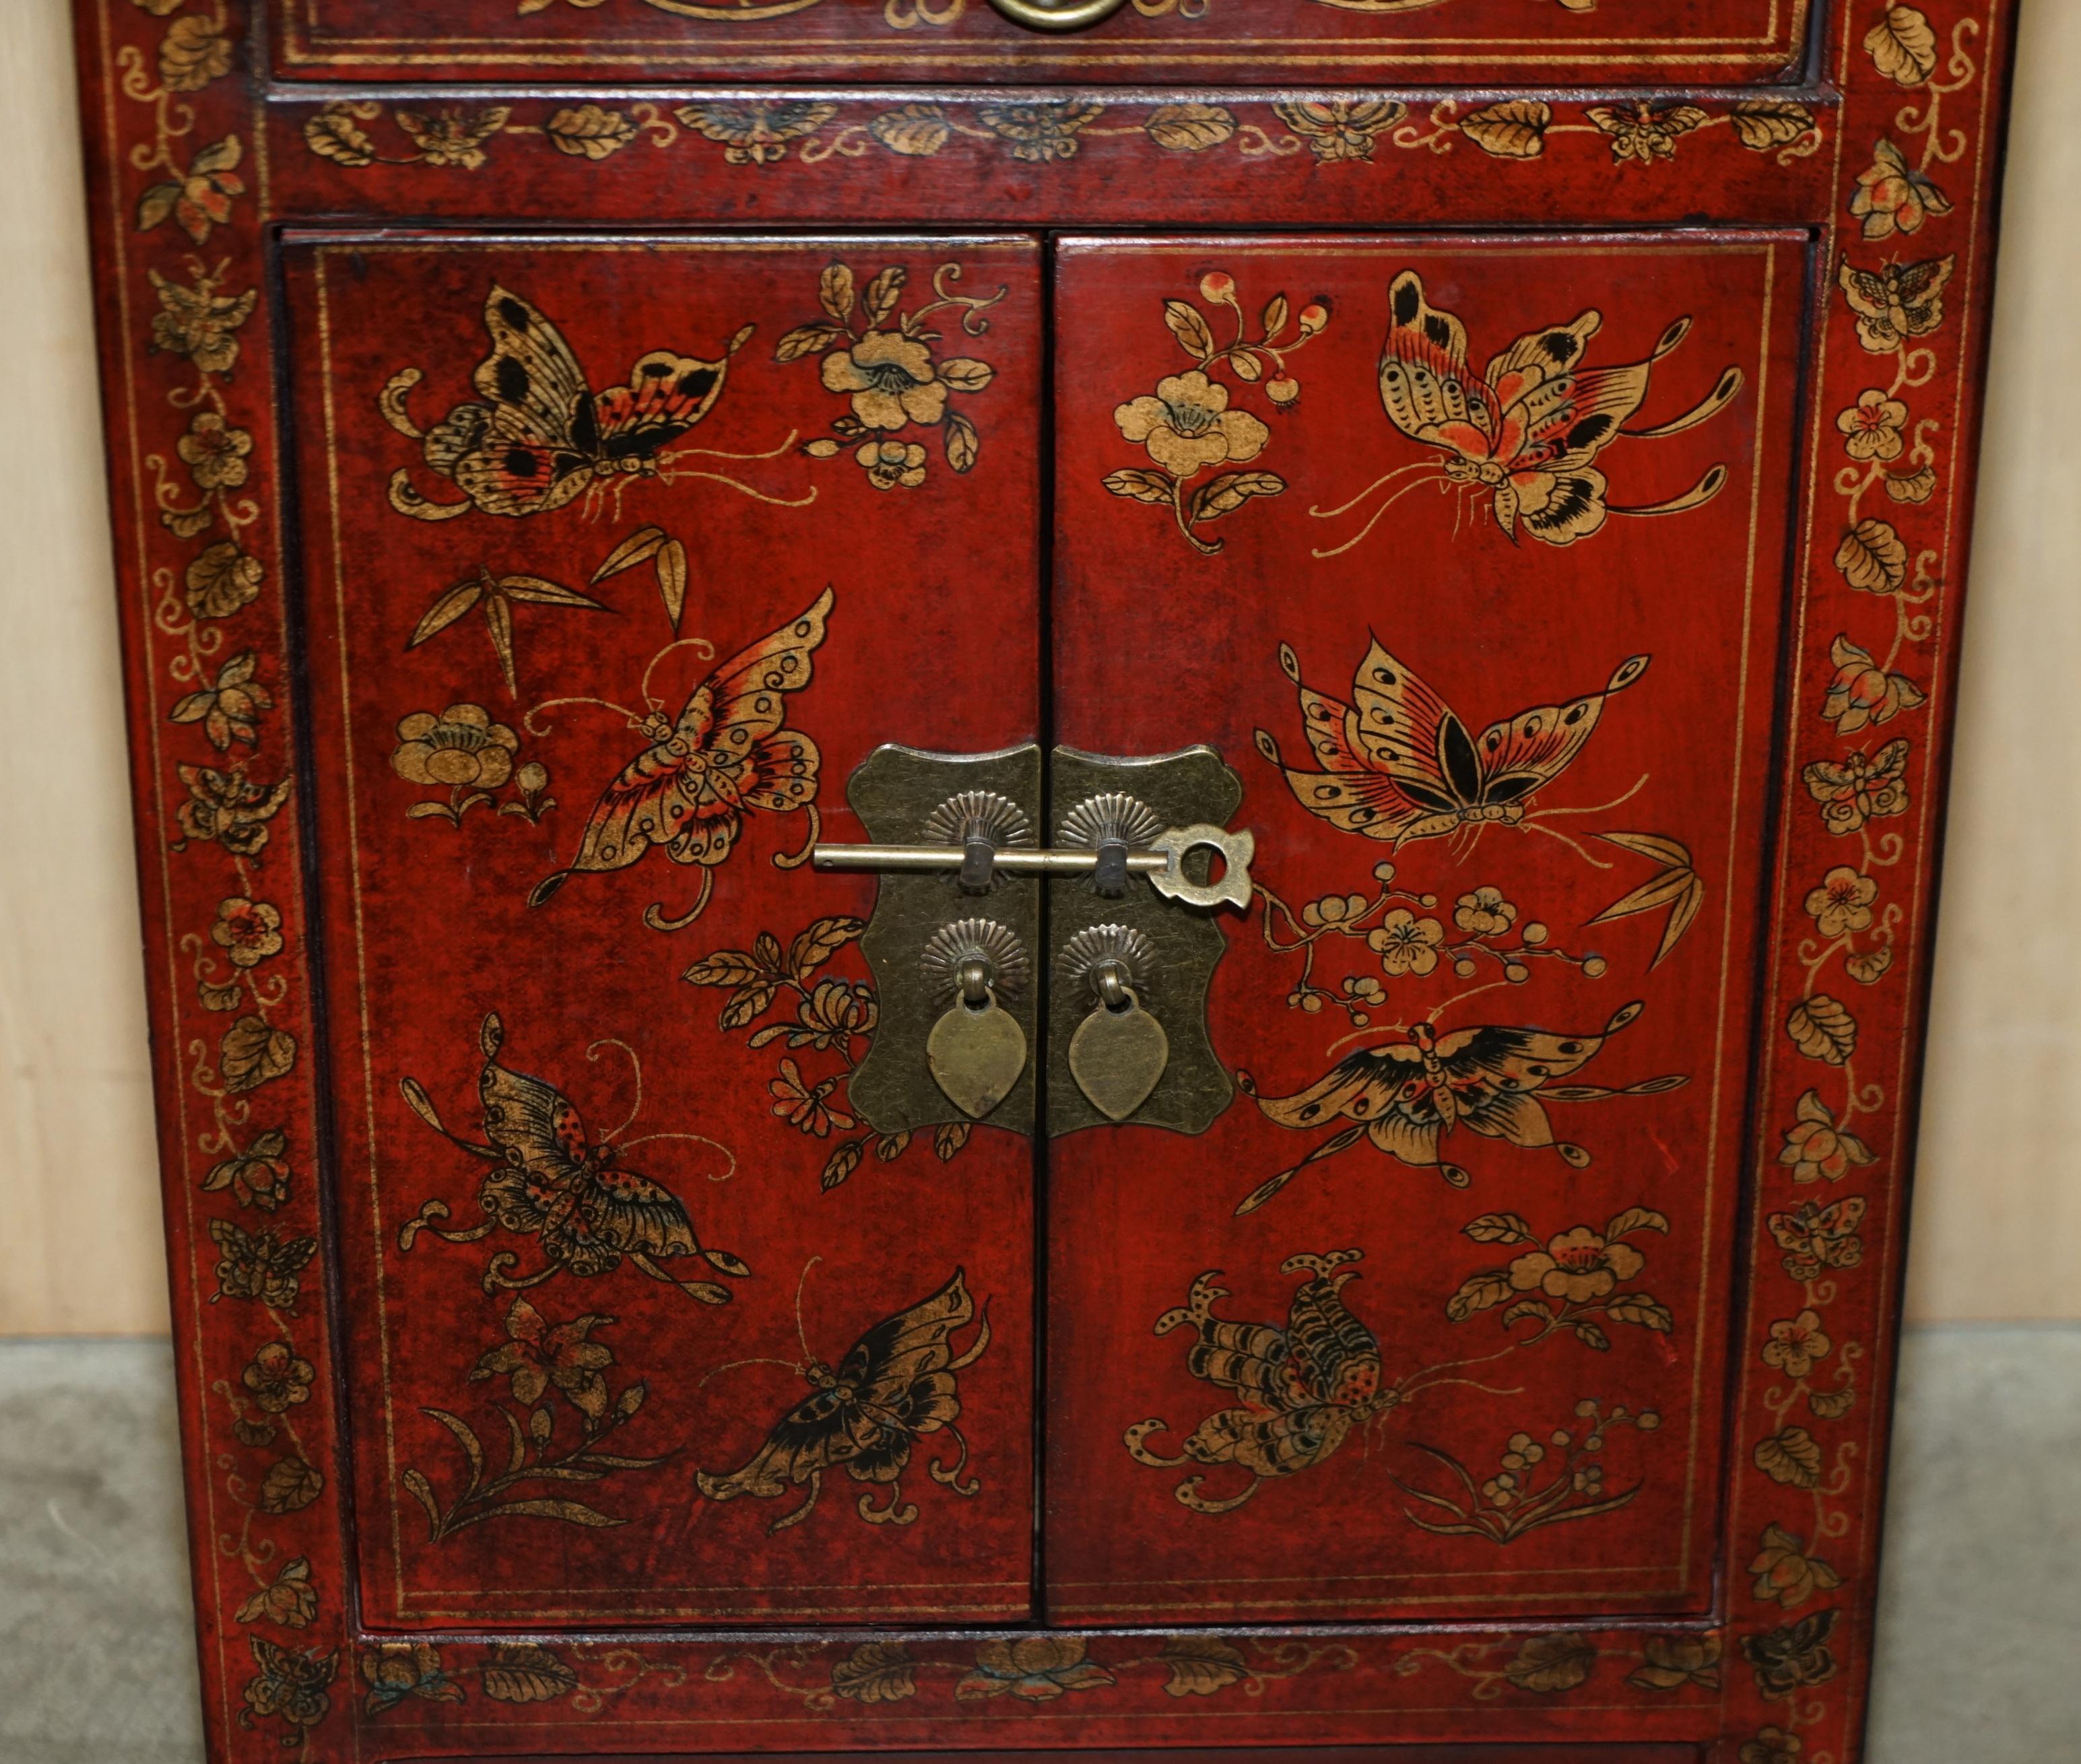 Vintage Chinese Hand Painted Lacquered Side Table Sized Schrank mit Schublade (Chinesisch) im Angebot